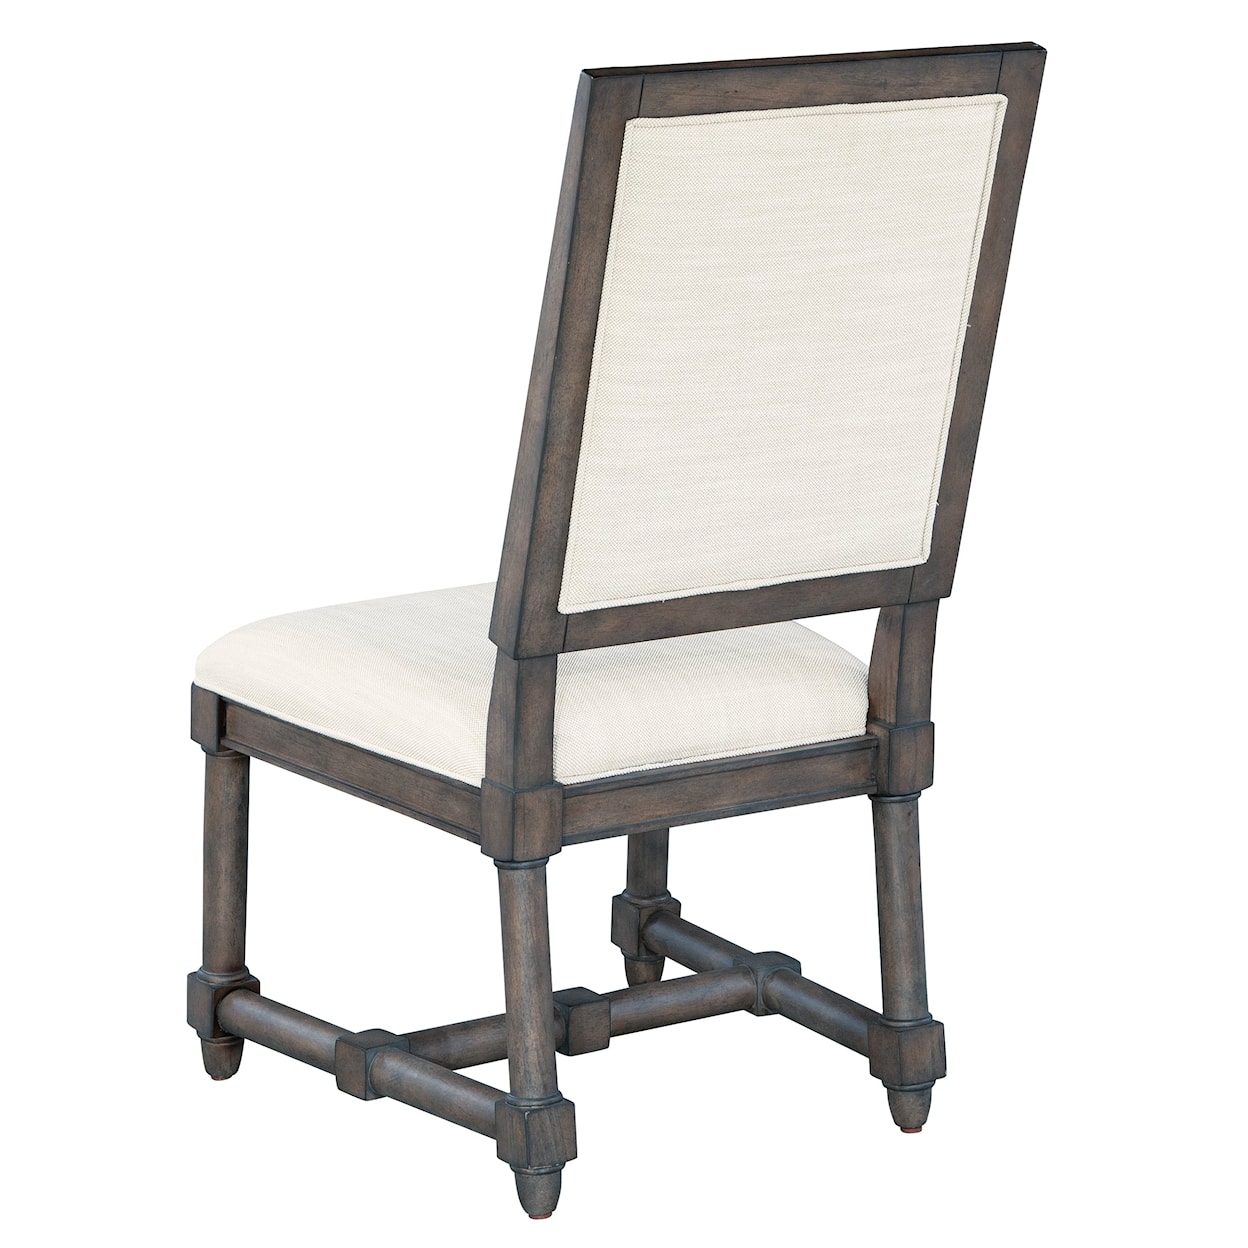 Hekman Lincoln Park Upholstered Dining Side Chair